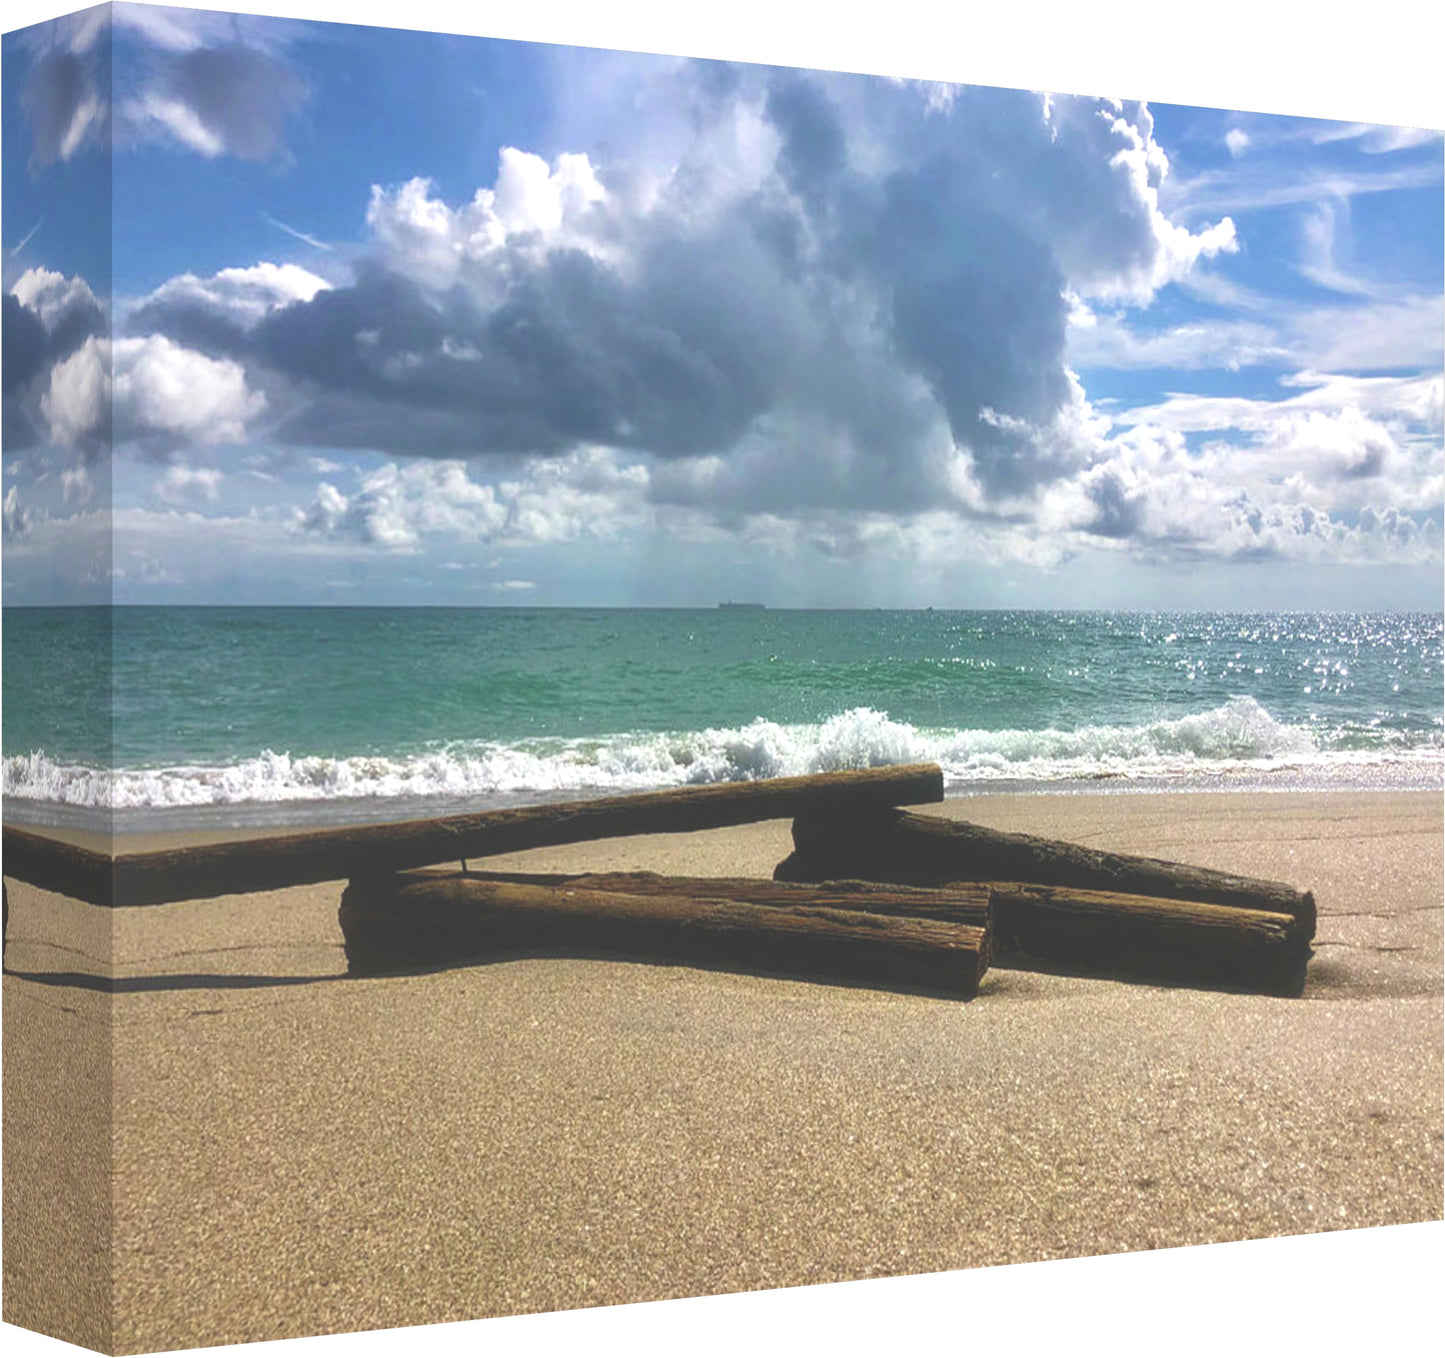 Washed Ashore Stacked Up  - Classic Canvas Print